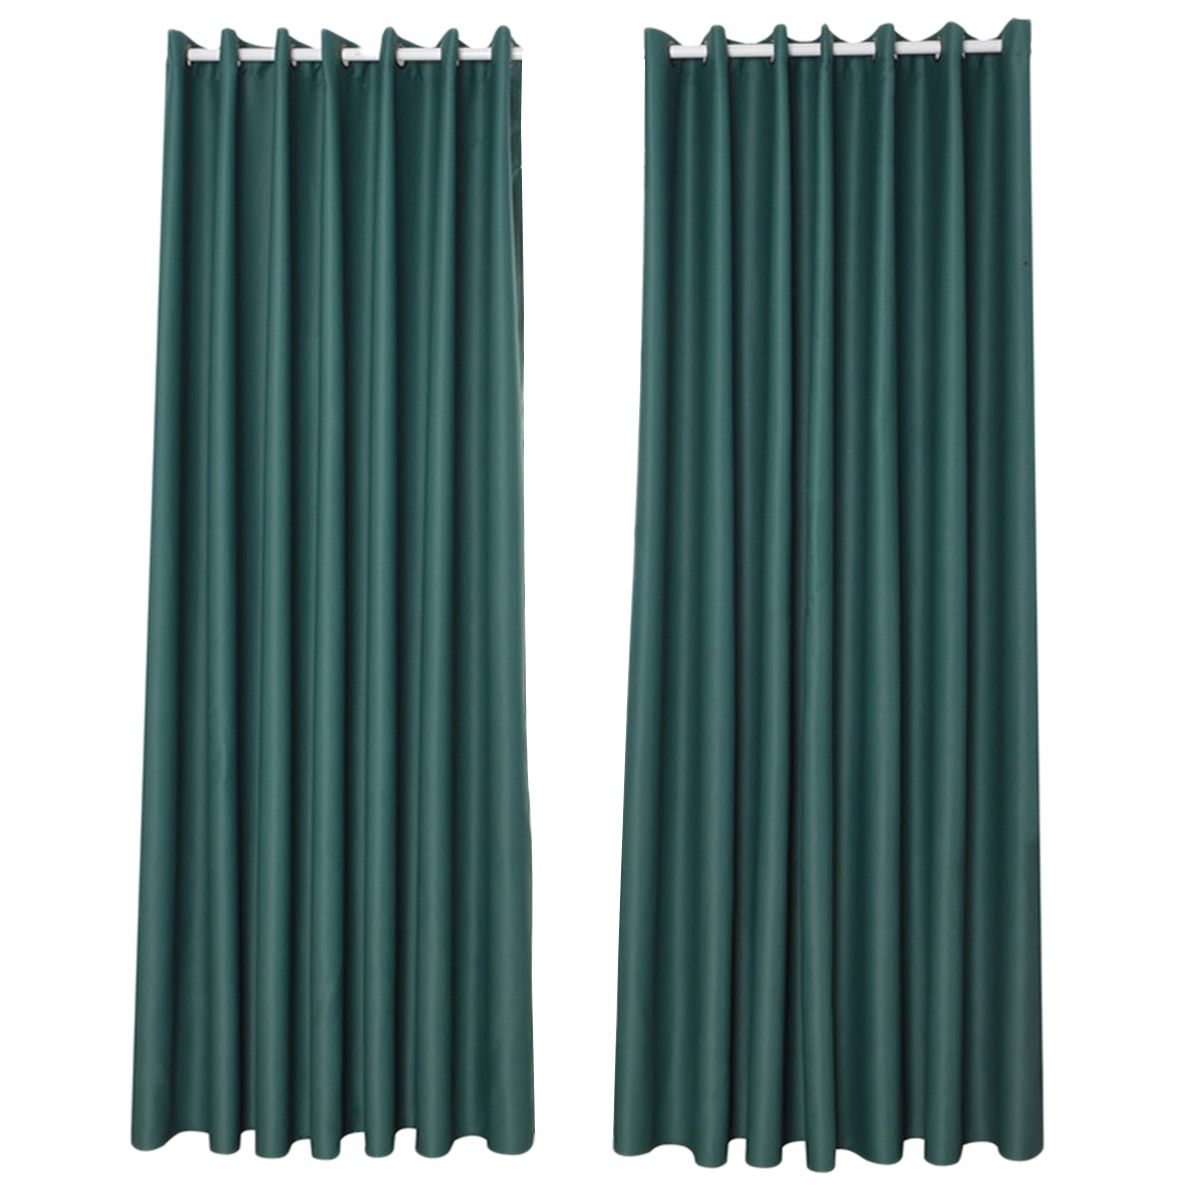 [%us $15.54 38% Off|ultra Sleep Well Energy Saving Thermal Insulated Textured  Thick Linen Pair Curtains Blackout Curtains Room Darkening Curtains In With Regard To Favorite Thermal Insulated Blackout Curtain Pairs|thermal Insulated Blackout Curtain Pairs For Most Current Us $15.54 38% Off|ultra Sleep Well Energy Saving Thermal Insulated Textured  Thick Linen Pair Curtains Blackout Curtains Room Darkening Curtains In|trendy Thermal Insulated Blackout Curtain Pairs Inside Us $15.54 38% Off|ultra Sleep Well Energy Saving Thermal Insulated Textured  Thick Linen Pair Curtains Blackout Curtains Room Darkening Curtains In|famous Us $ (View 13 of 20)